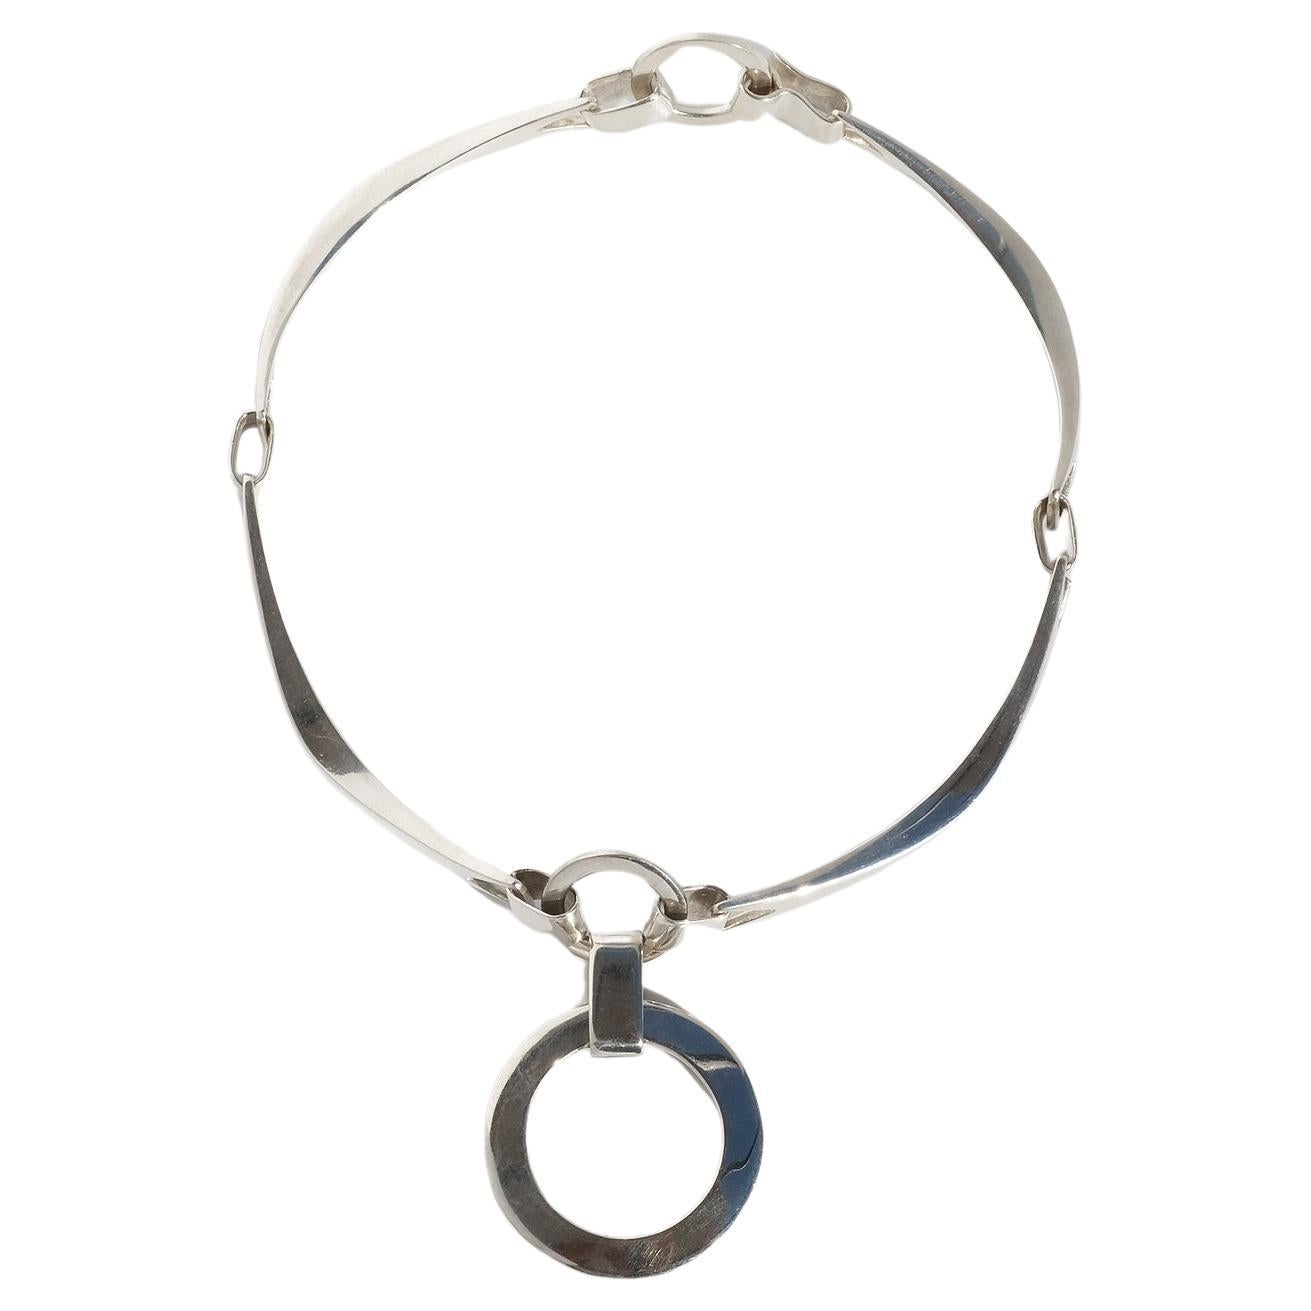 This sterling silver necklace is adorned with a sterling silver circle pendant. The necklace itself consists of four arched silver bars which are attached to each other with five silver links and two smaller silver circles. The necklace opens and